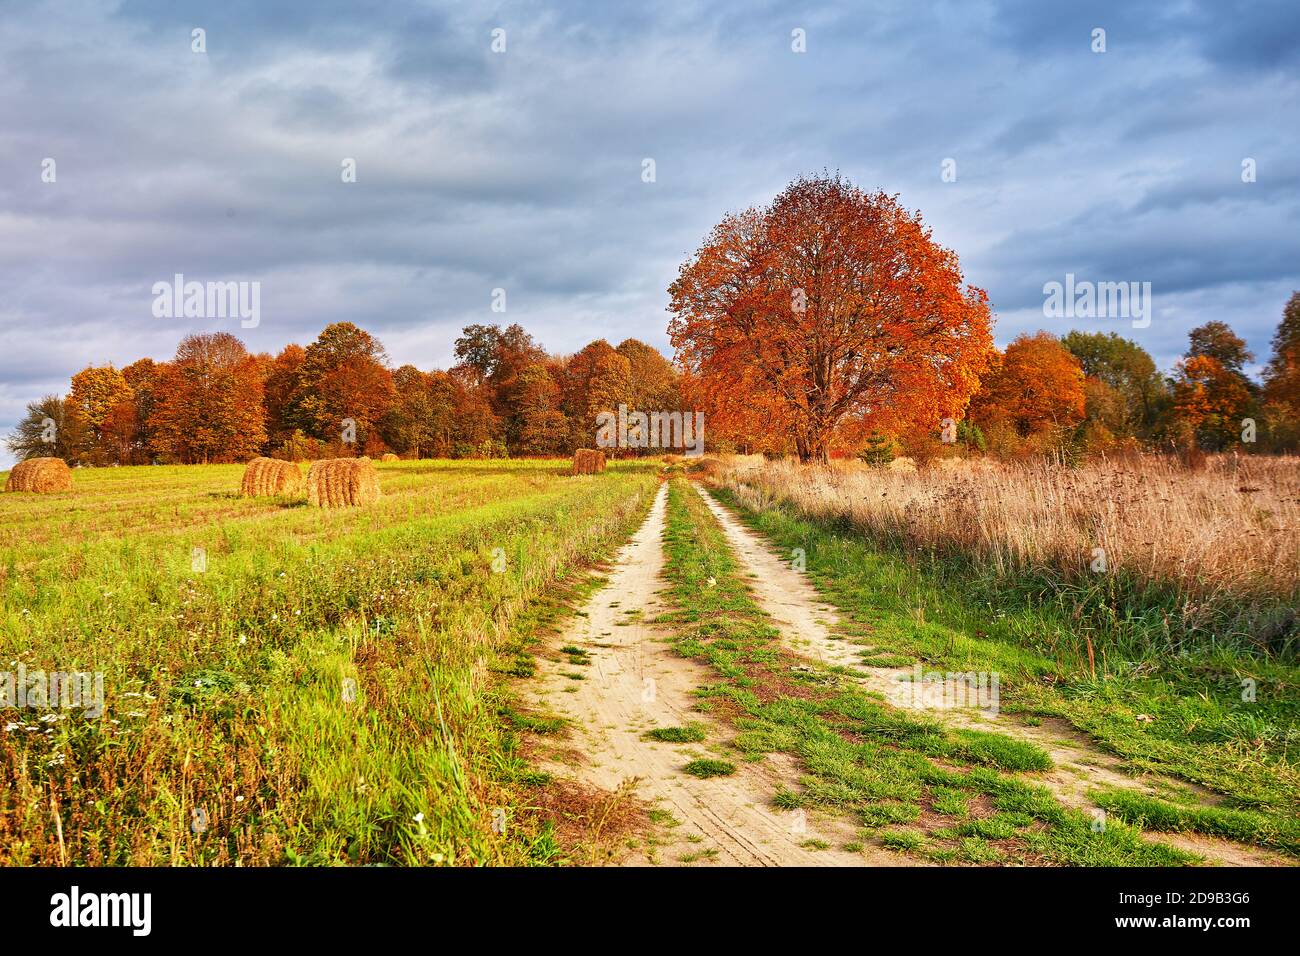 Autumn Field, Maple Tree, Country Road. Fall rural landscape. Dry leaves in the foreground. Lonely beautiful pastures autumn tree. Changing season in Stock Photo